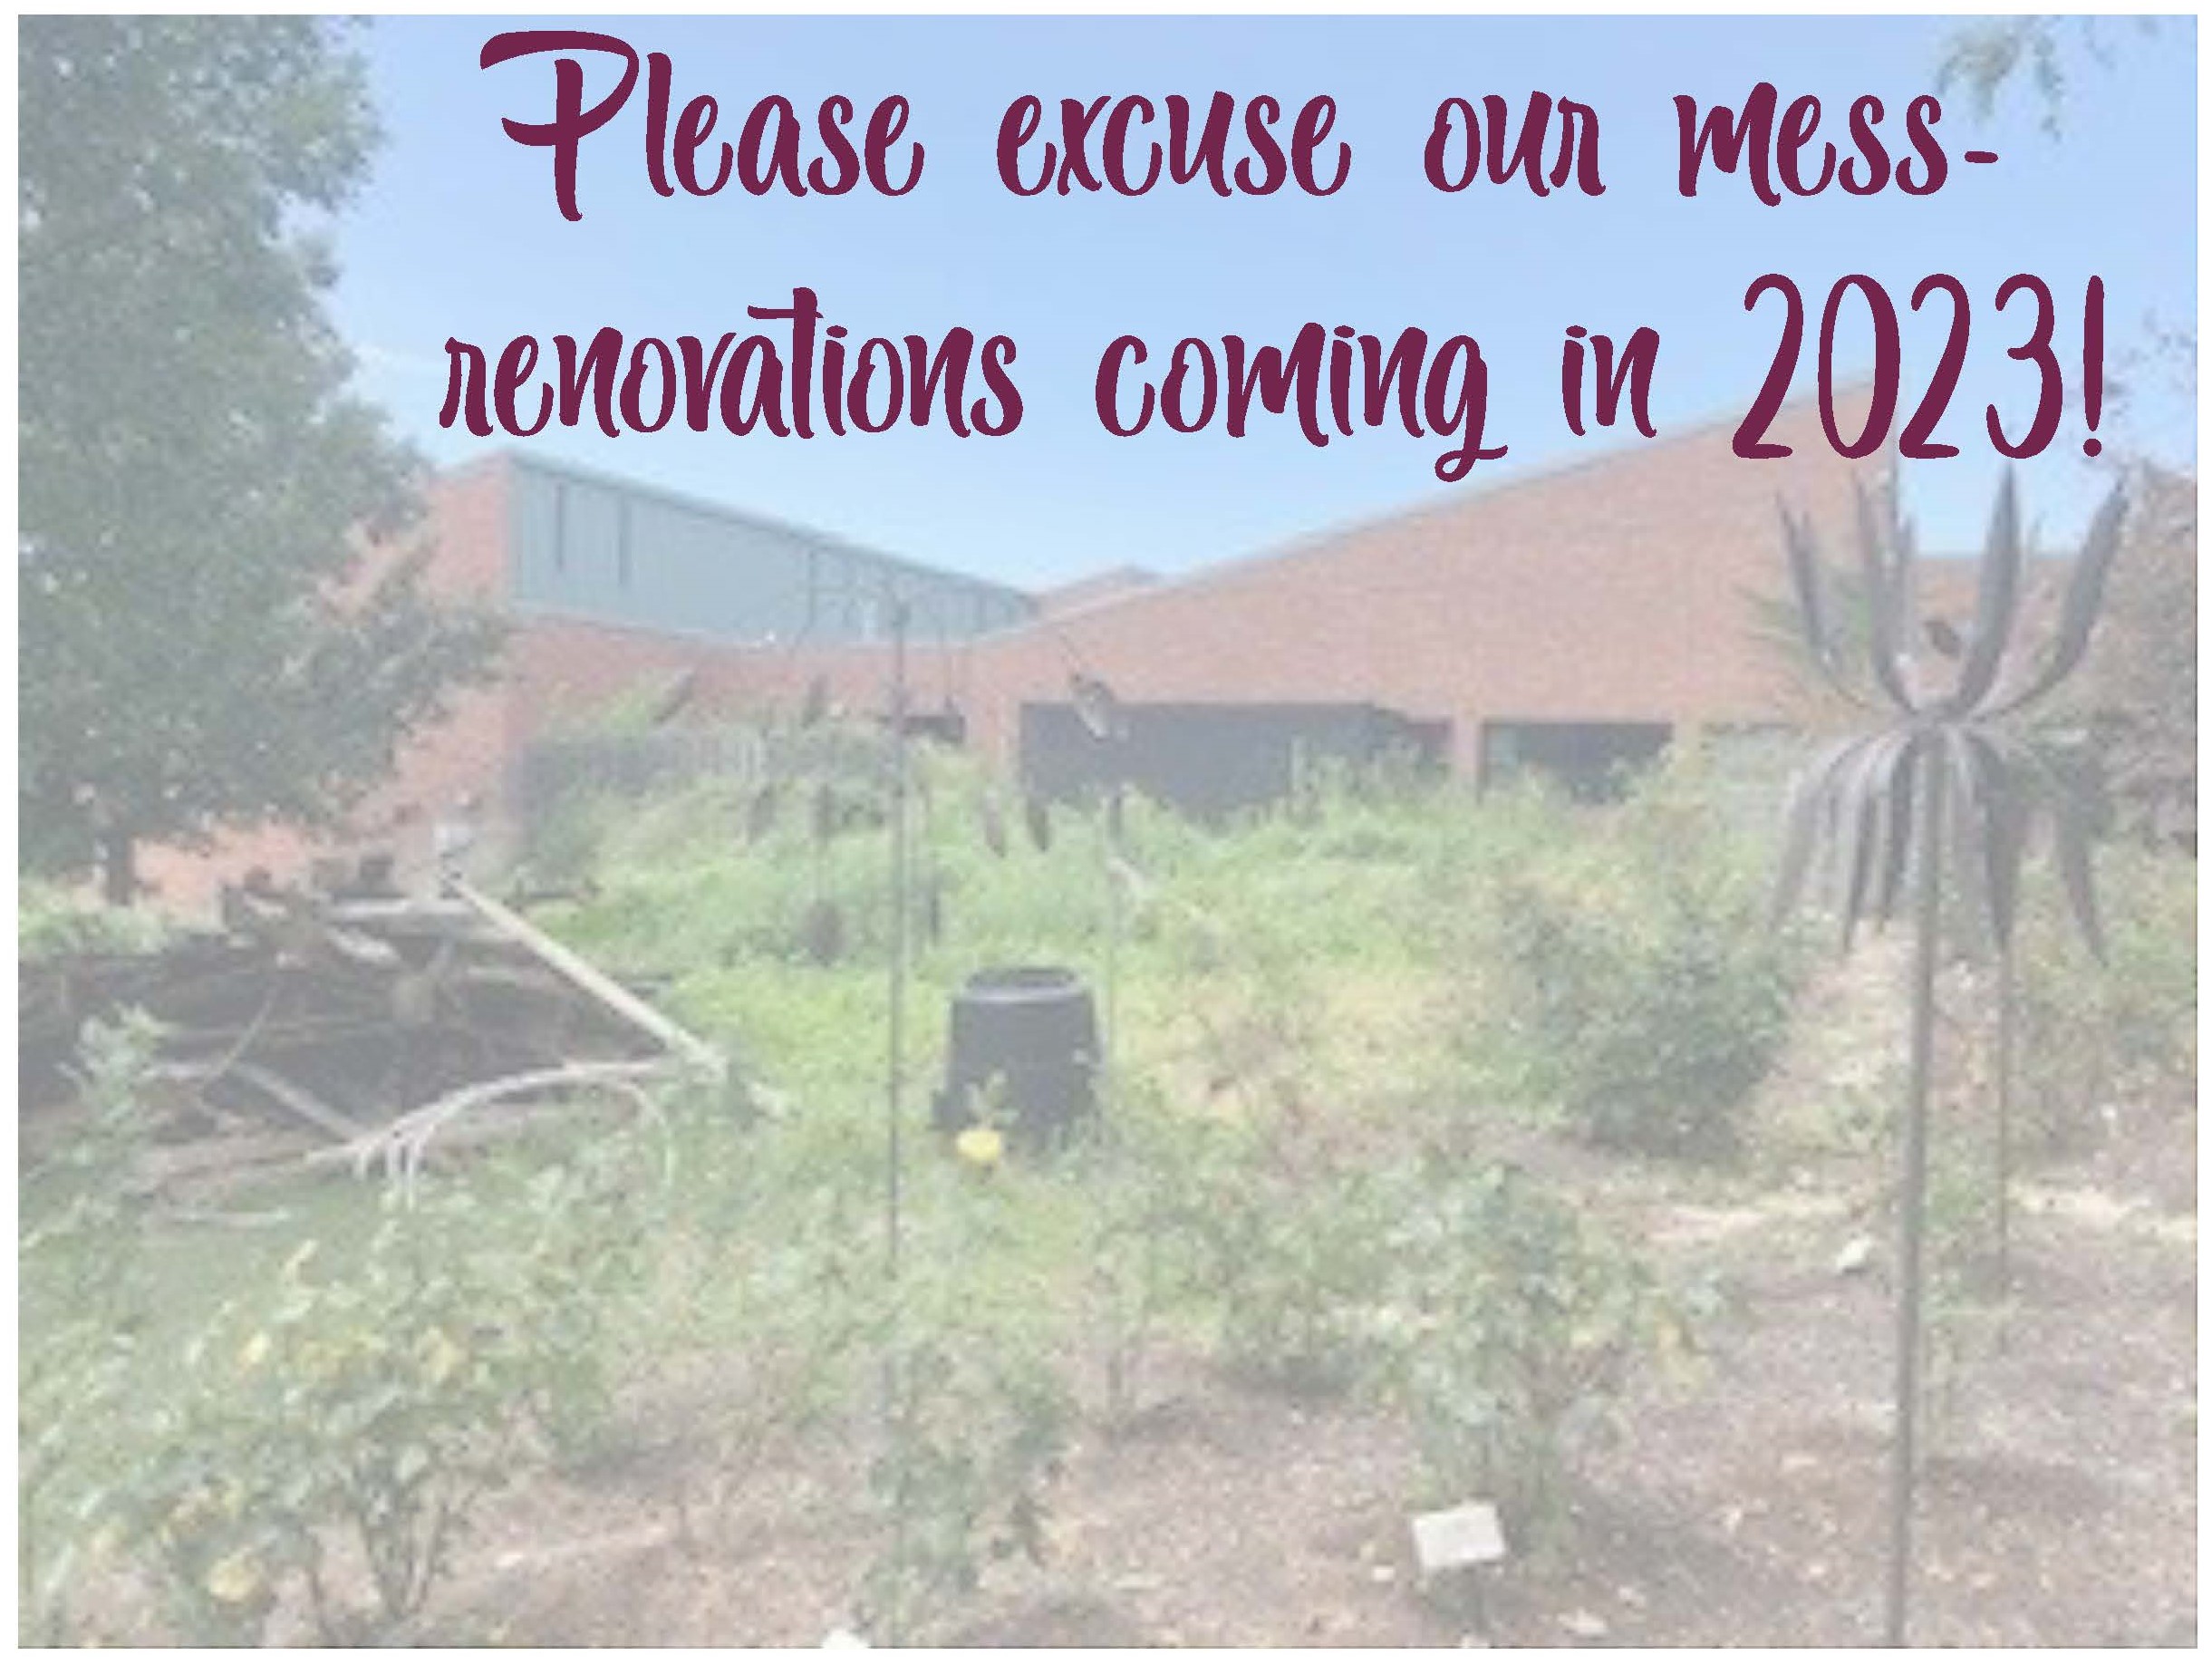 Excuse our mess-renovations coming 2023!